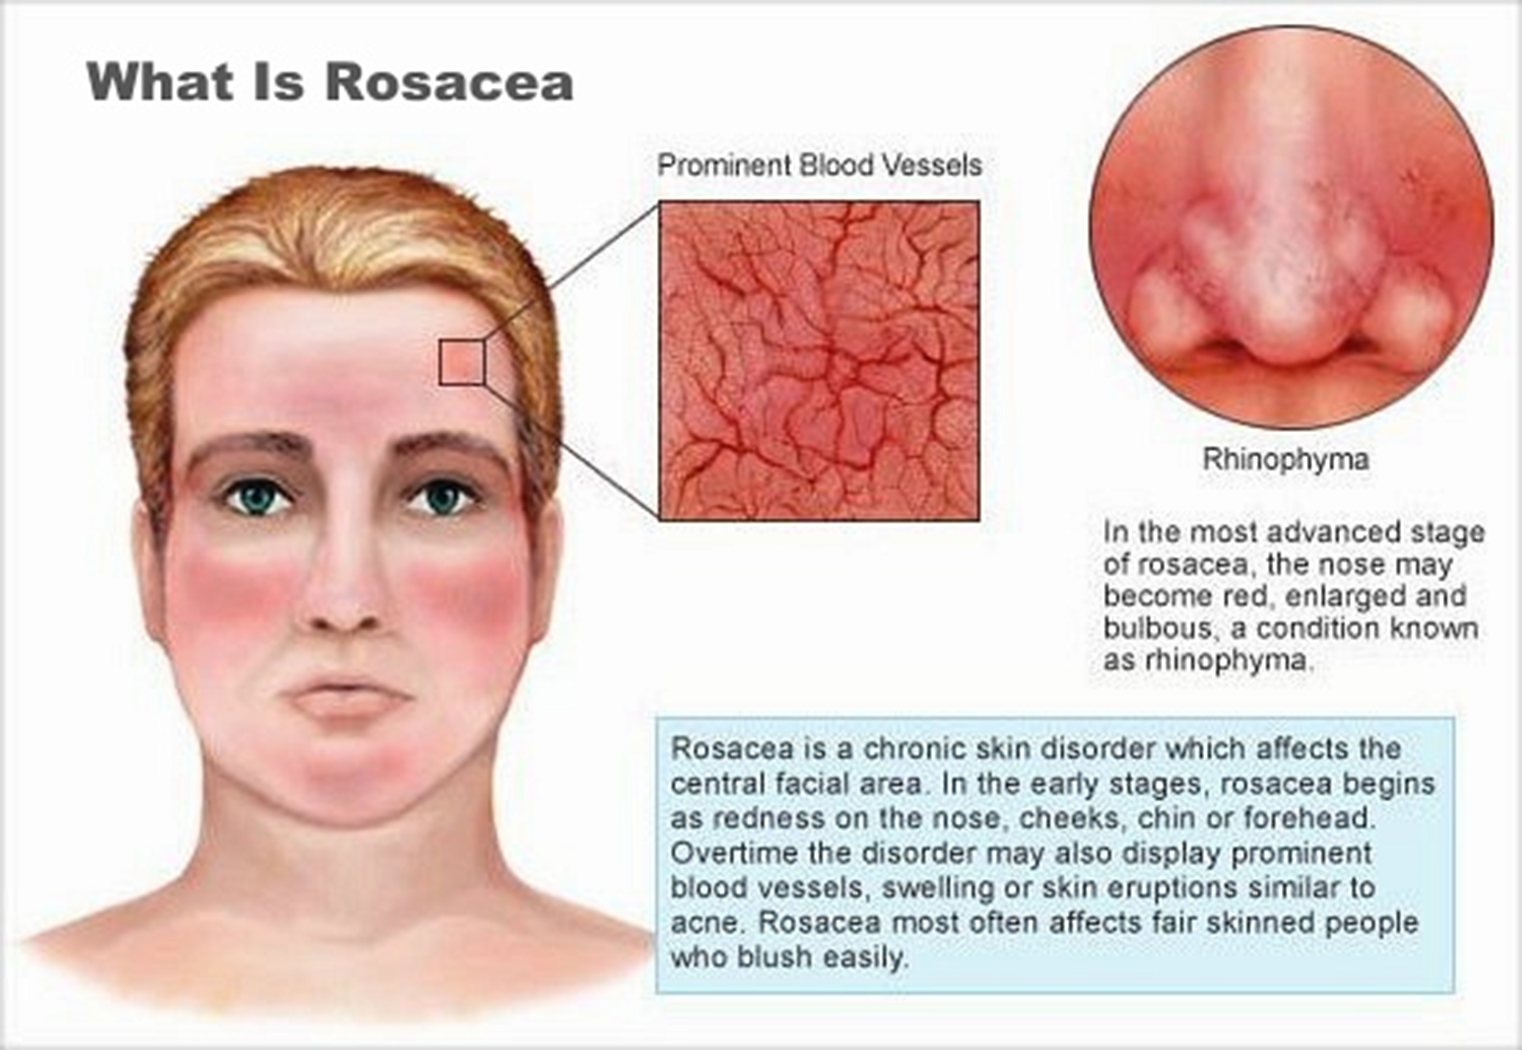 Primary Signs of Rosacea